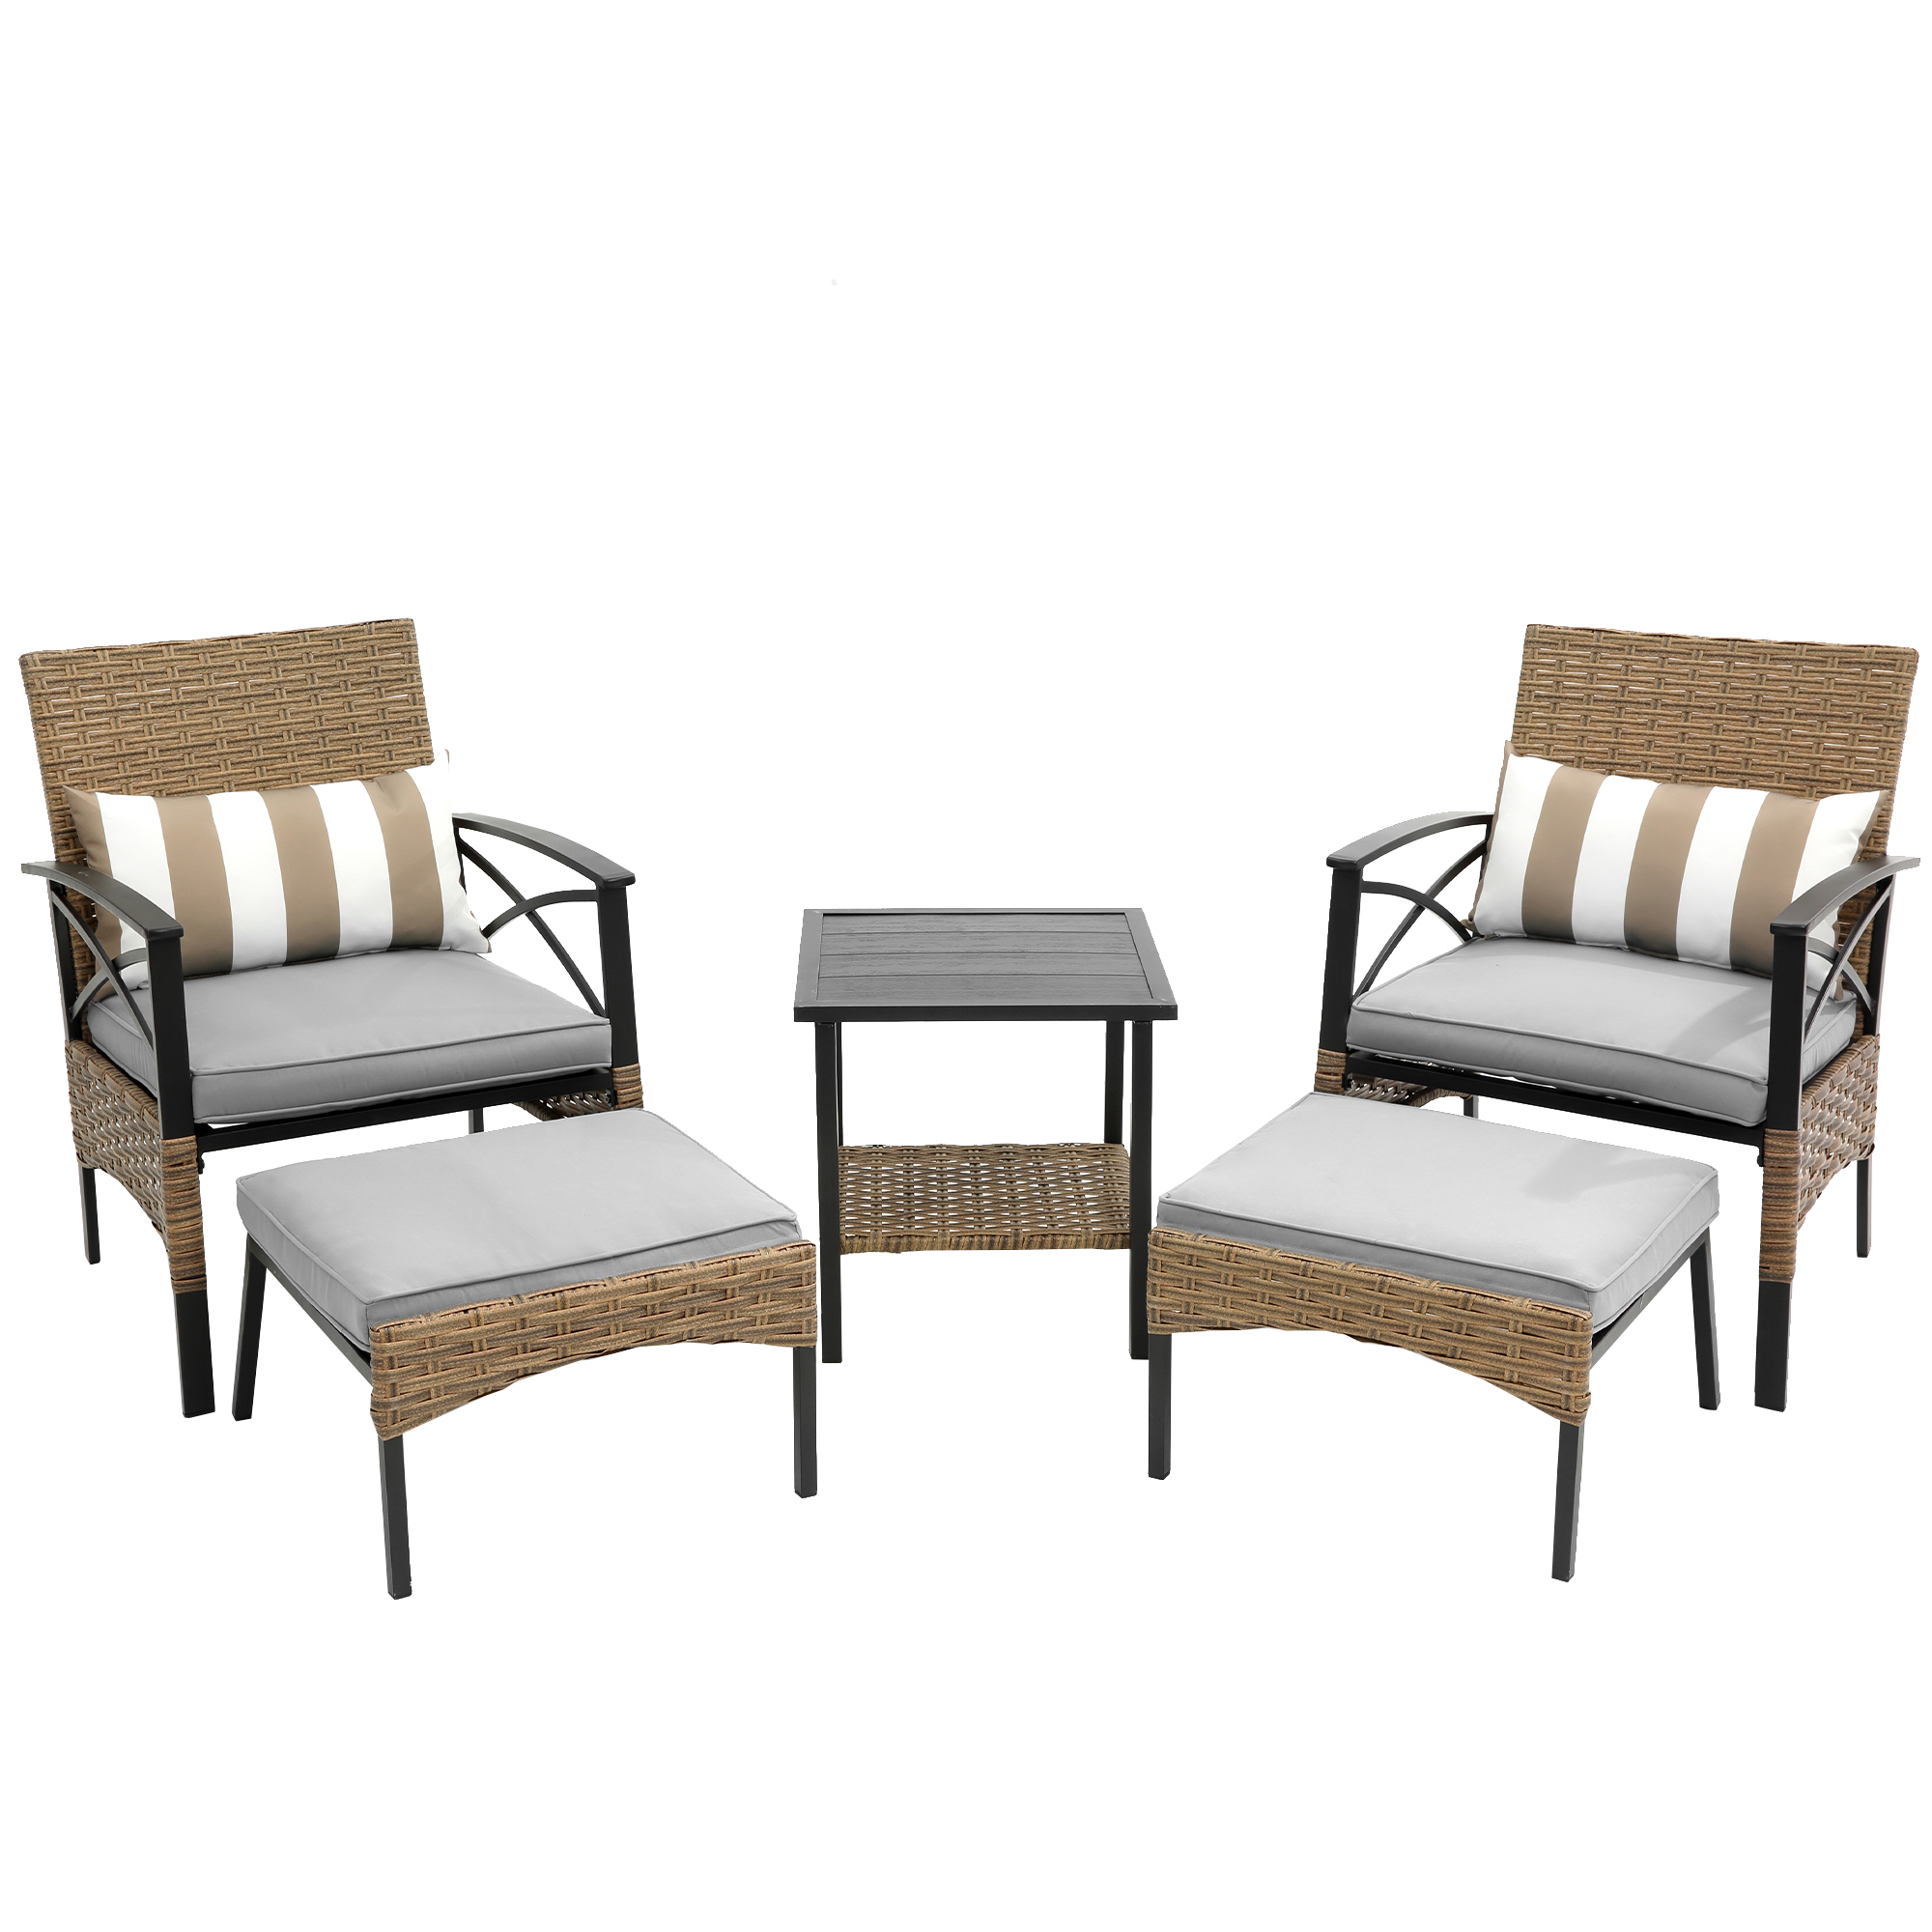 Patio Outdoor Furniture Chair Set, 5 PCS Wicker Sectional Sofa Set, Garden Conversation Set with 2 Cushioned Chairs, 2 Footstools & Tea Table, Lawn Pool Balcony Deck Yard Porch Chat Set - image 2 of 9